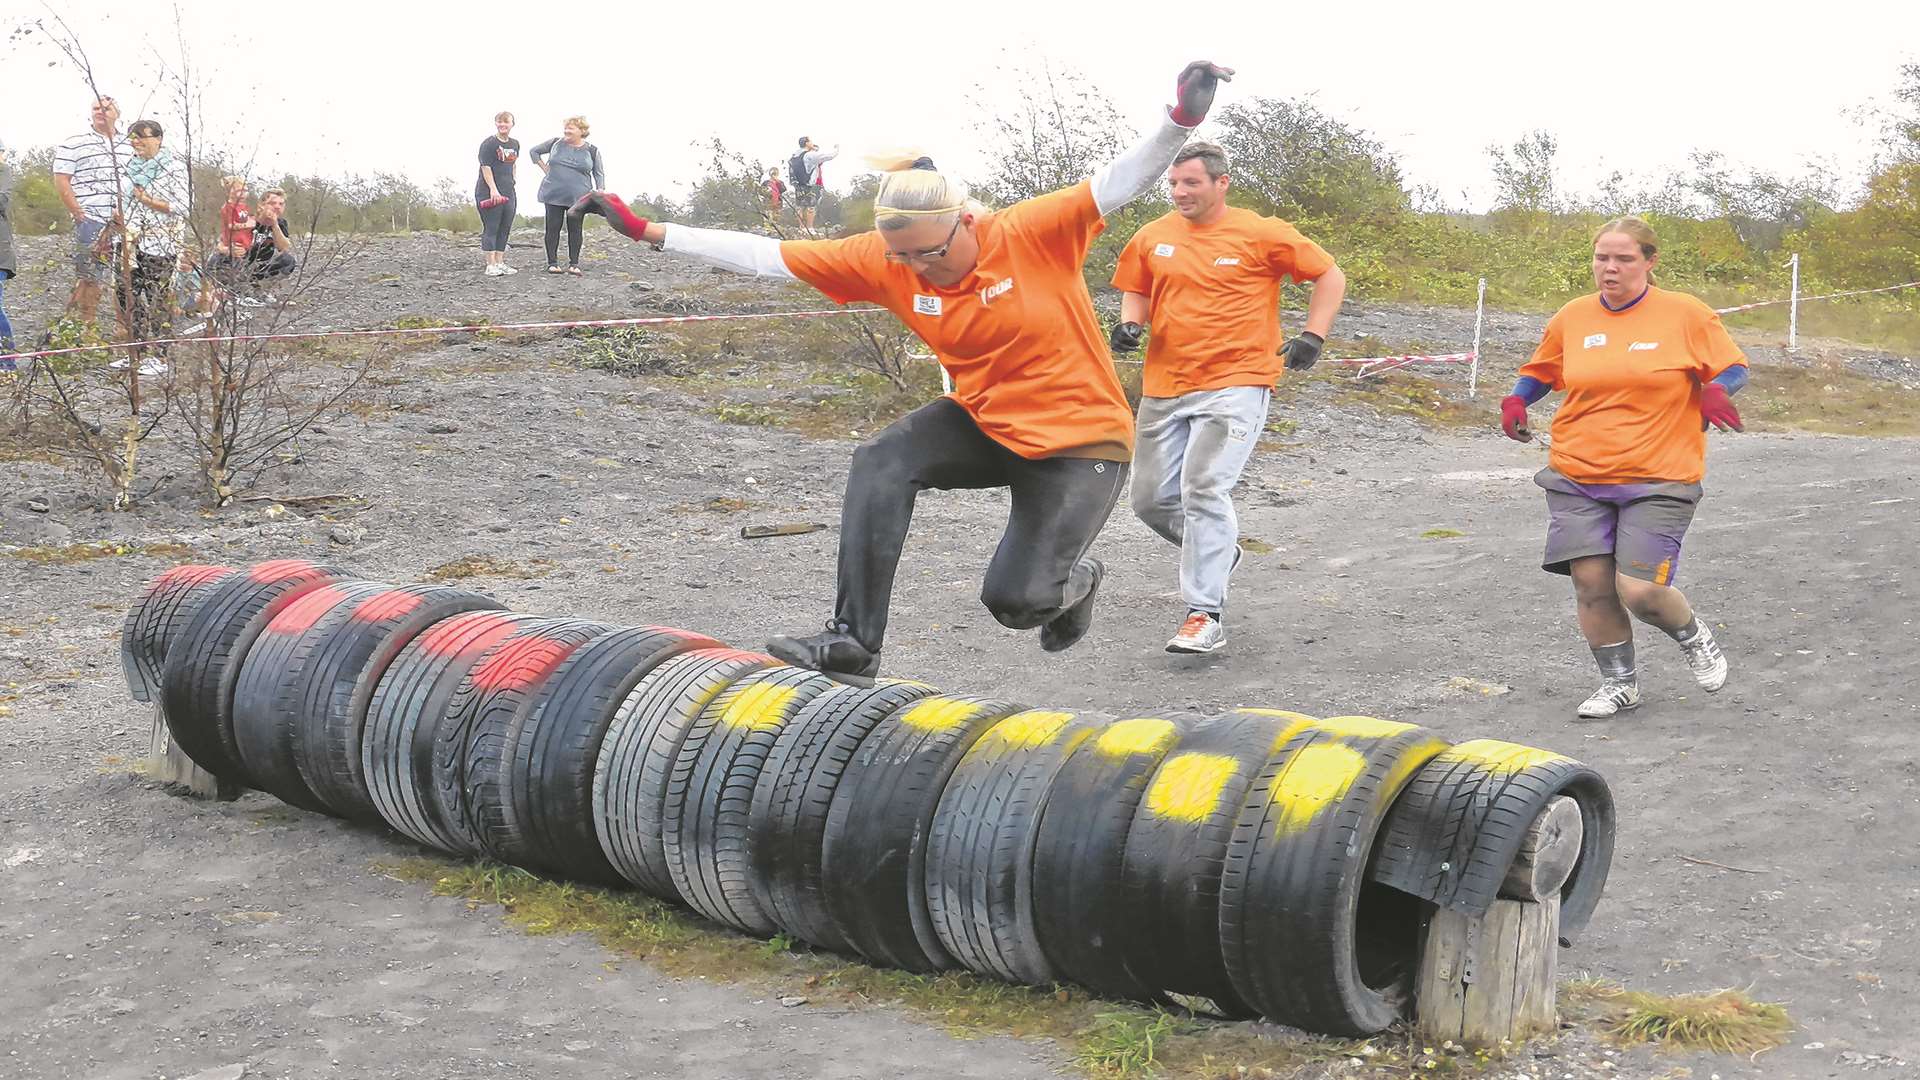 The KM Assault Course Challenge is one of many annual events run by the KM Charity Team to raise funds for good causes.